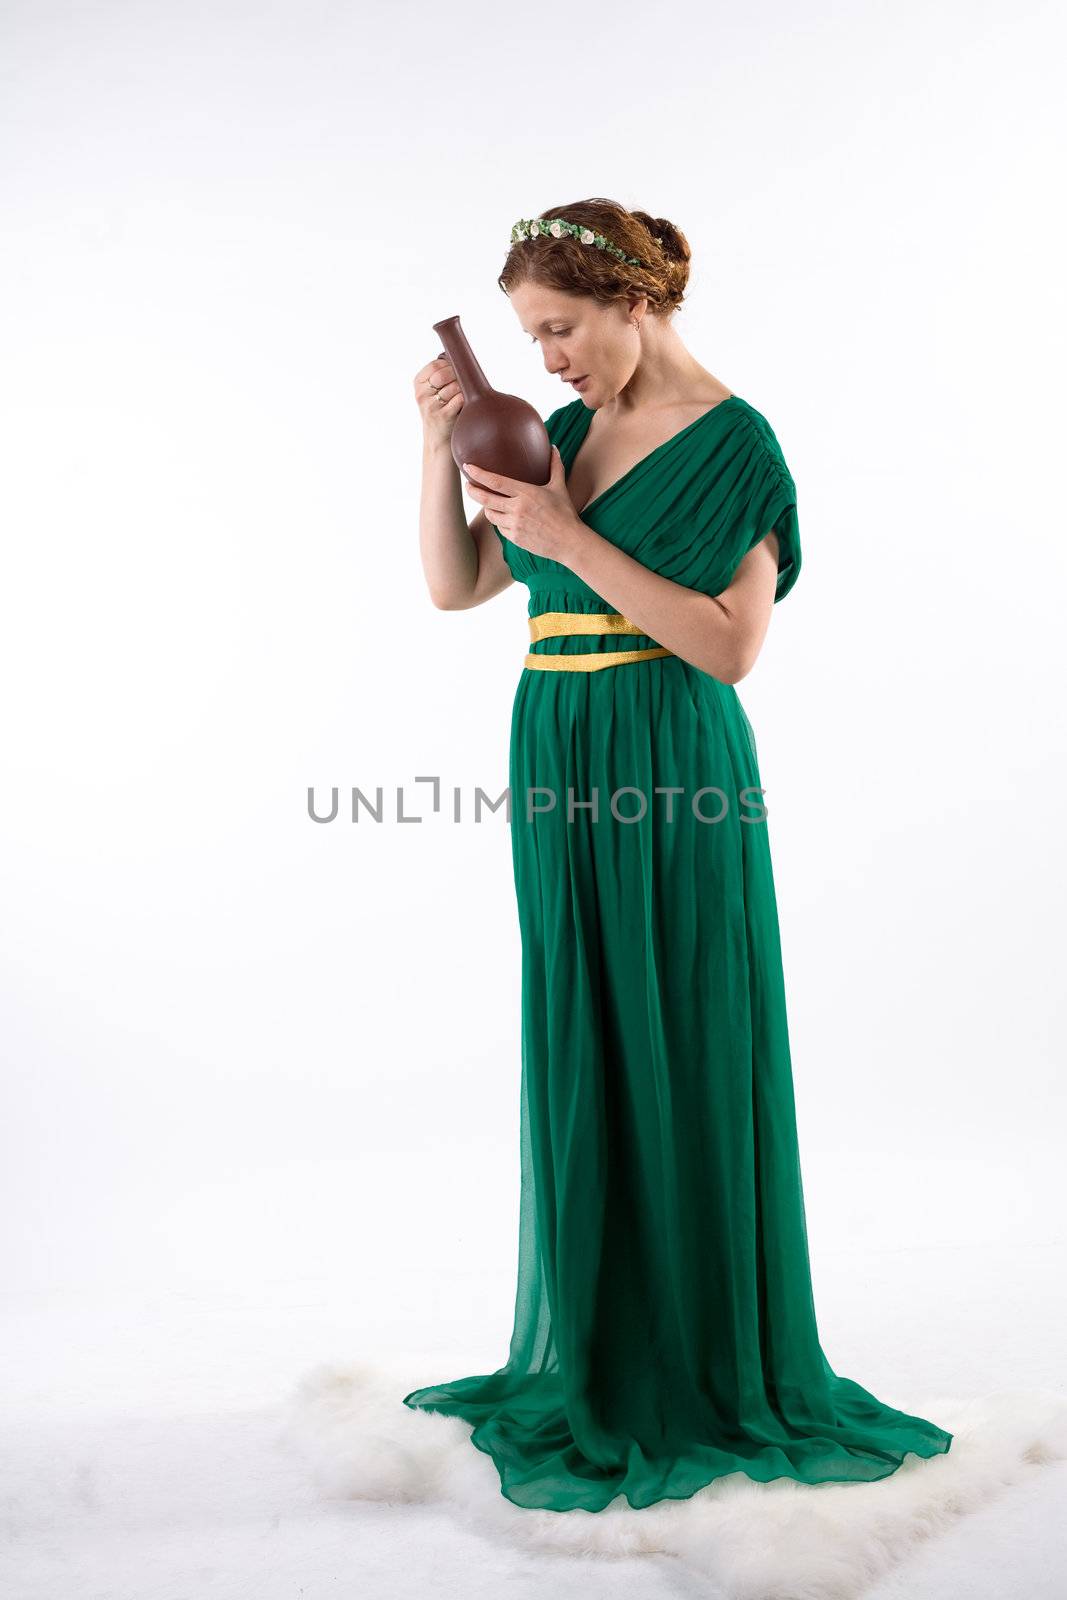 Lady in green antique dress handing jug on white background
